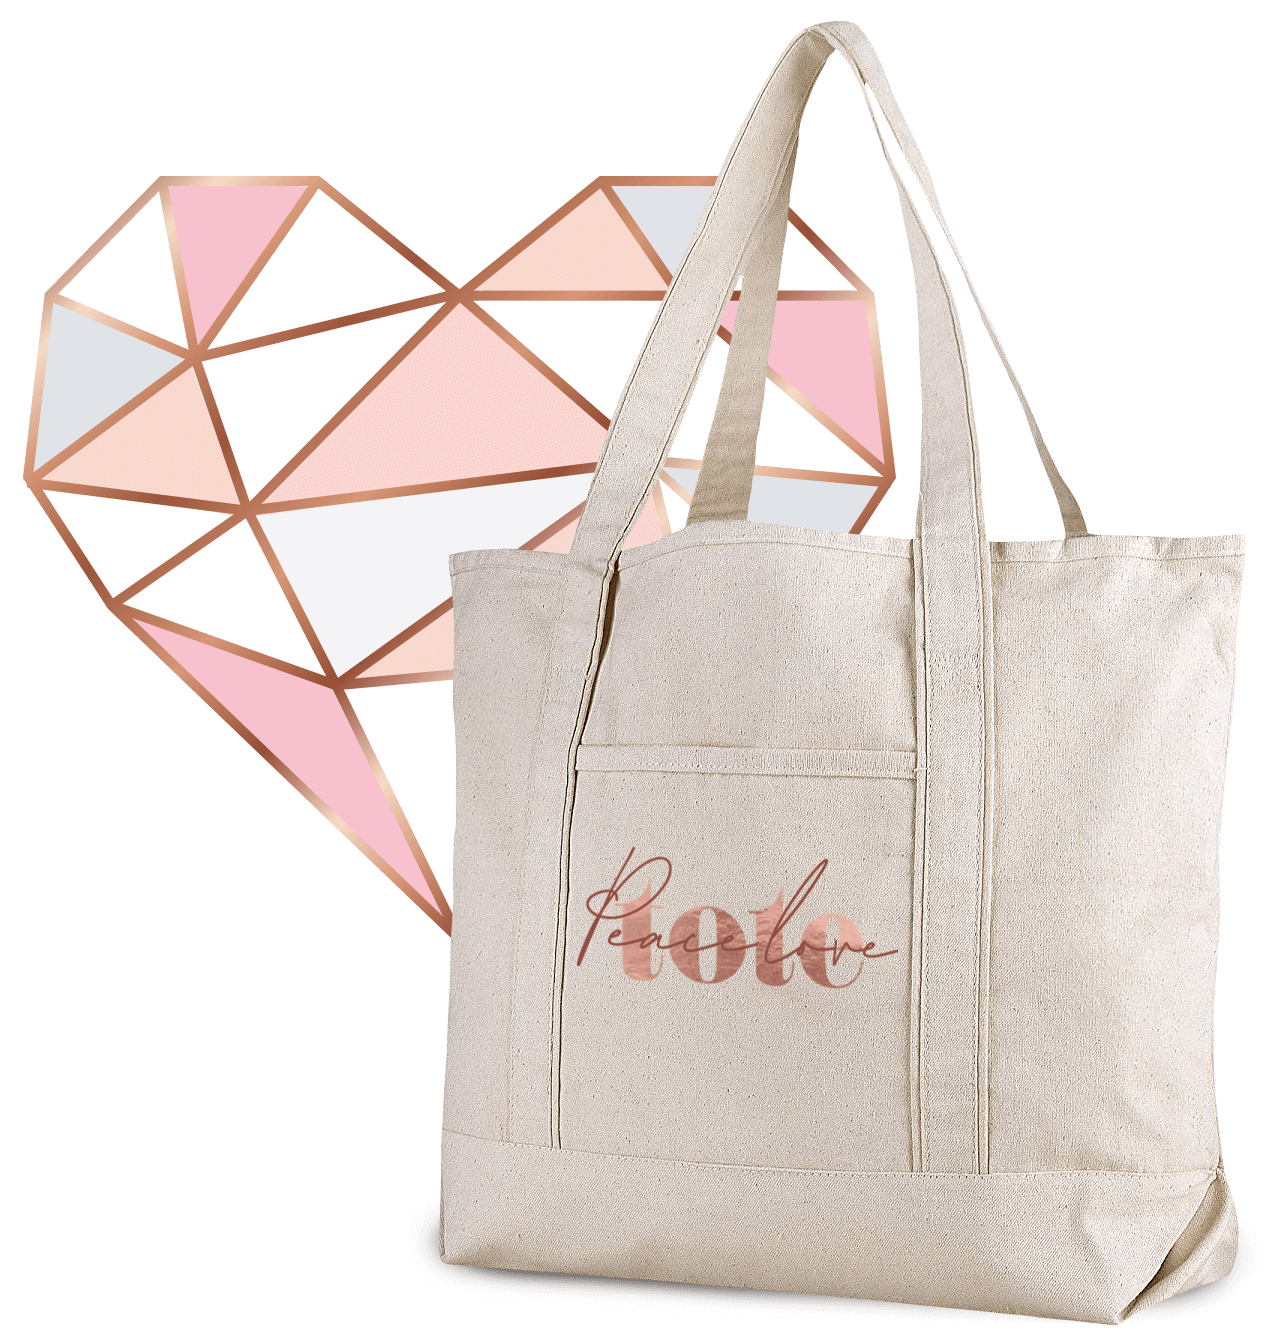 Request A Peace Love Tote | A Breast Cancer Gift to Brighten the Spirit